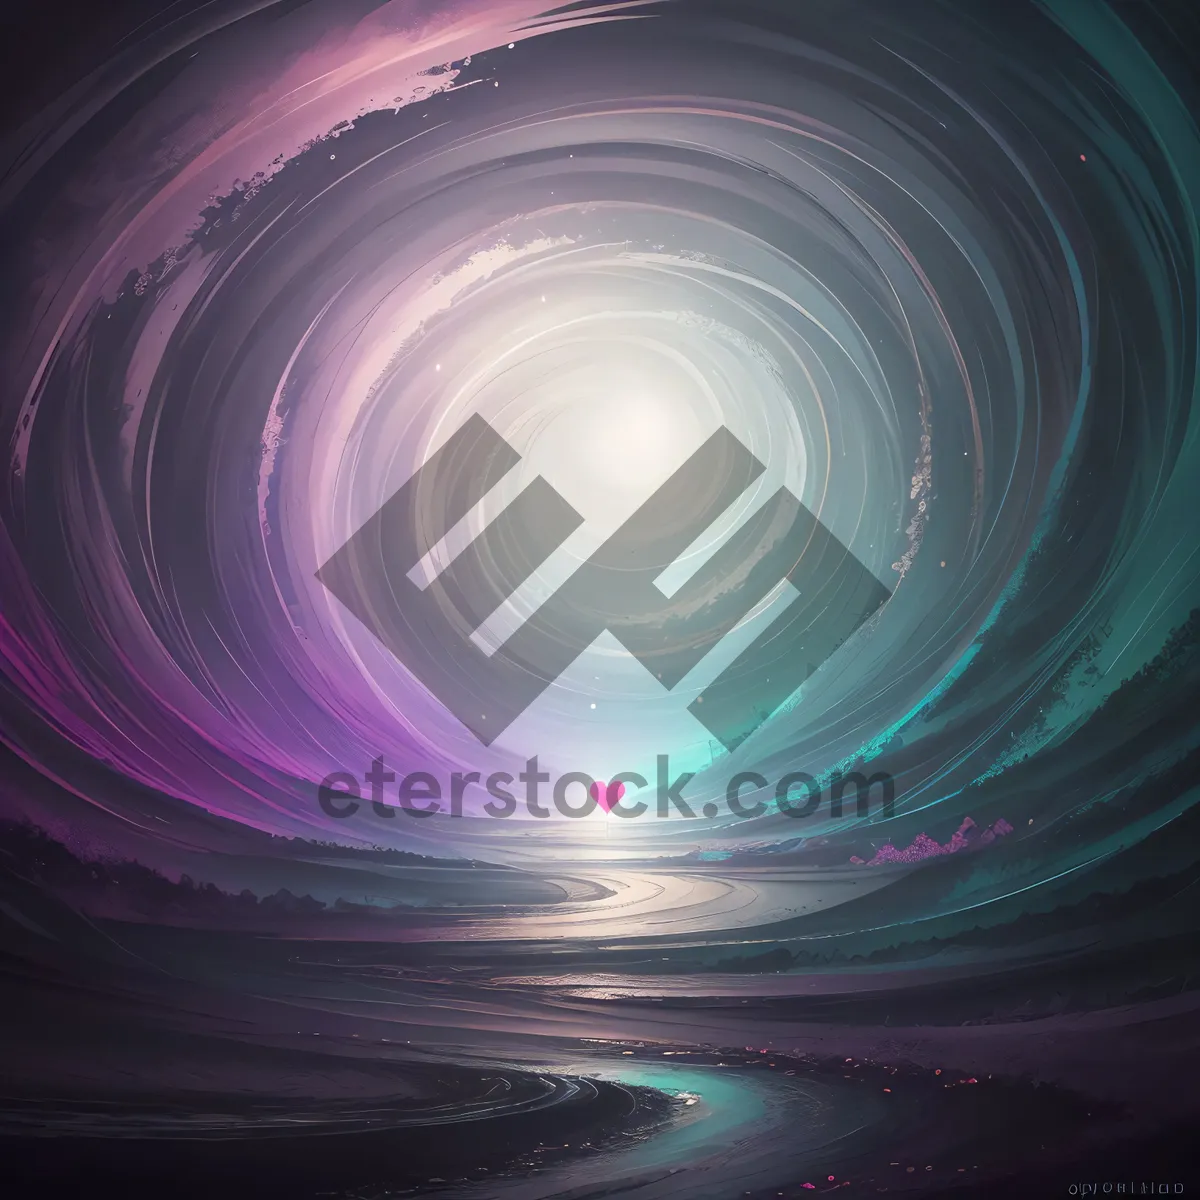 Picture of Abstract Motion: Futuristic Swirls and Circles in Vivid Colors